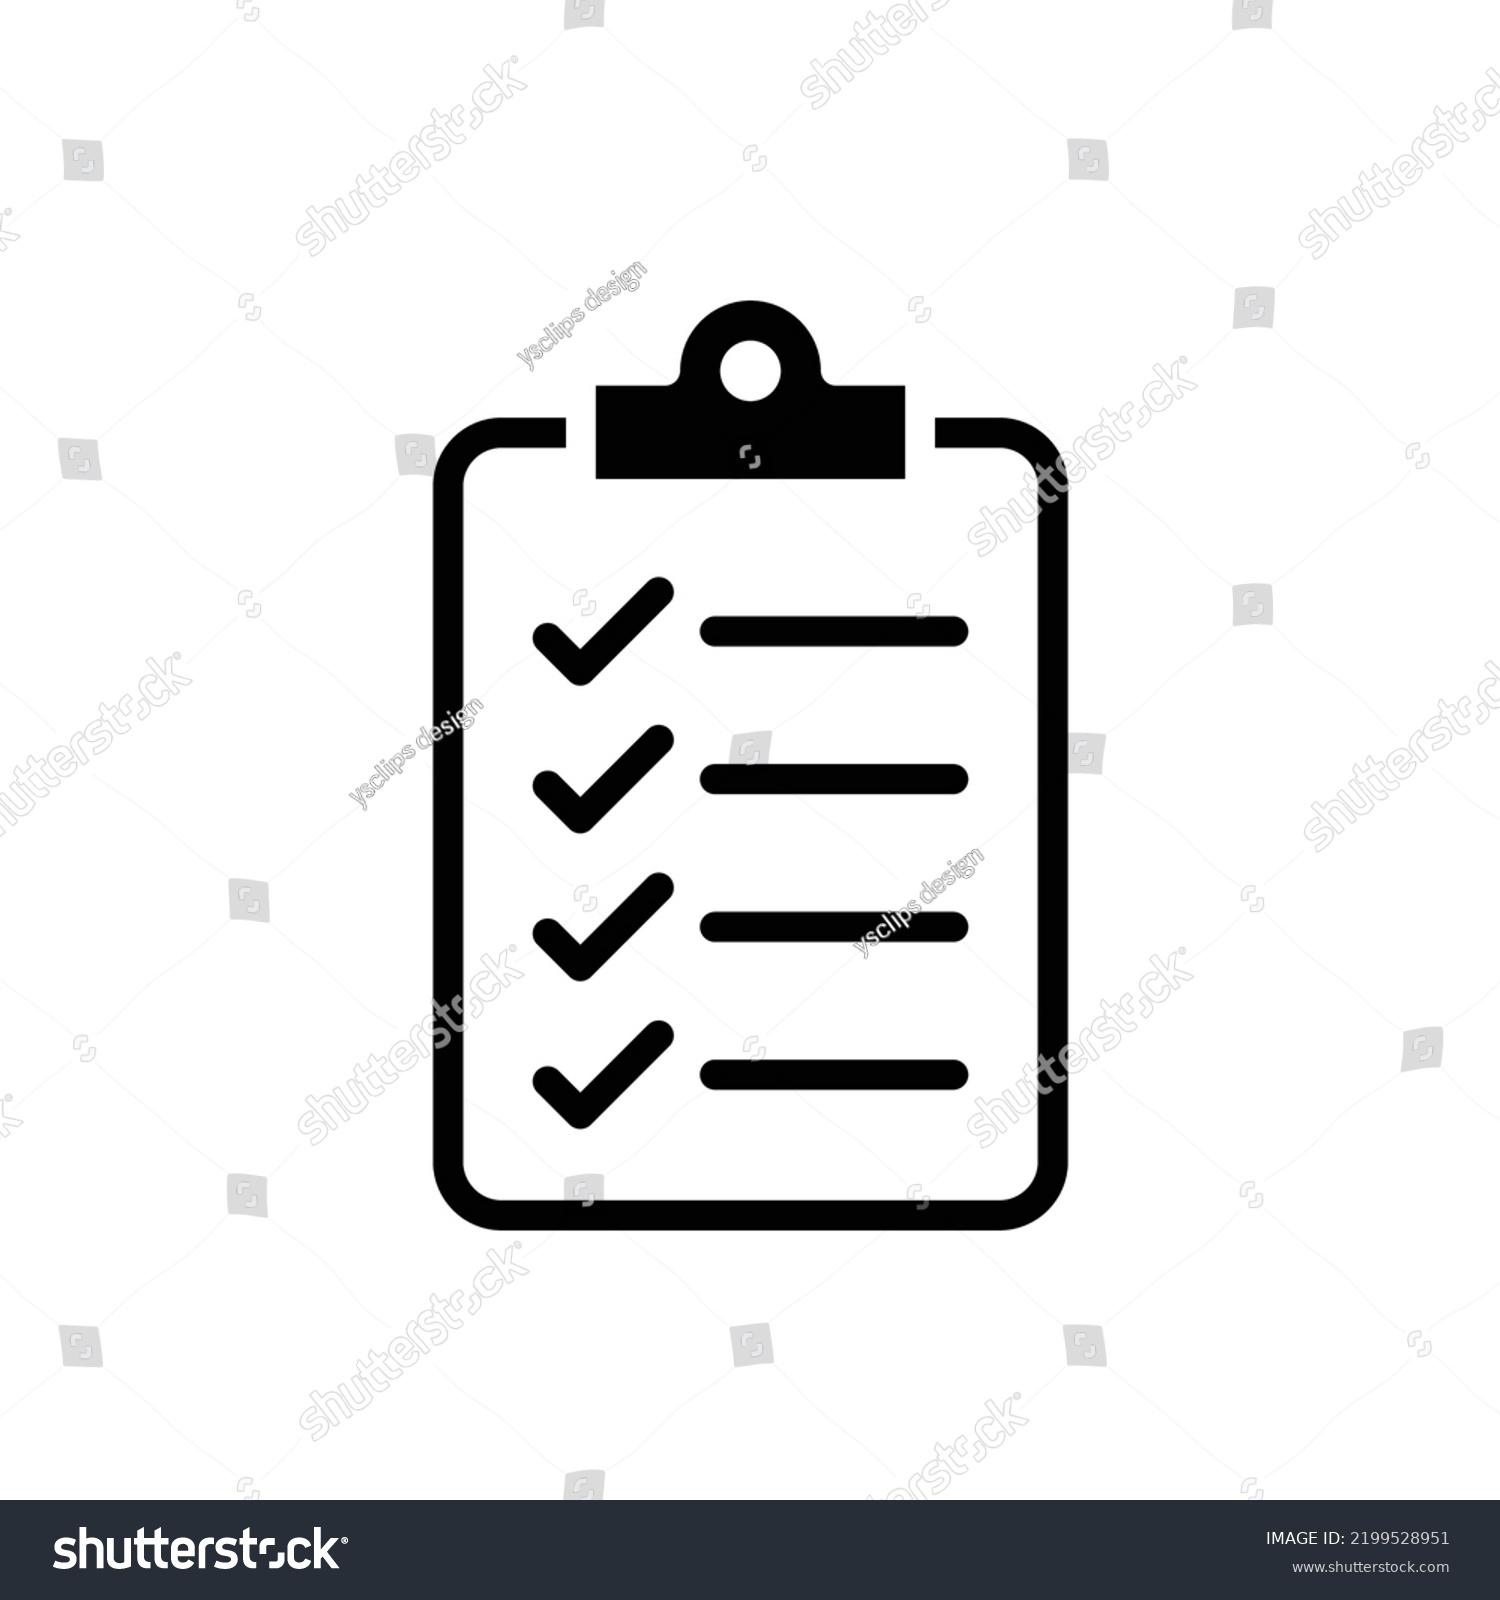 Clipboard checklist icon. Simple flat style. Document with checkmark, business agreement concept. Vector illustration isolated on white background. EPS 10. #2199528951